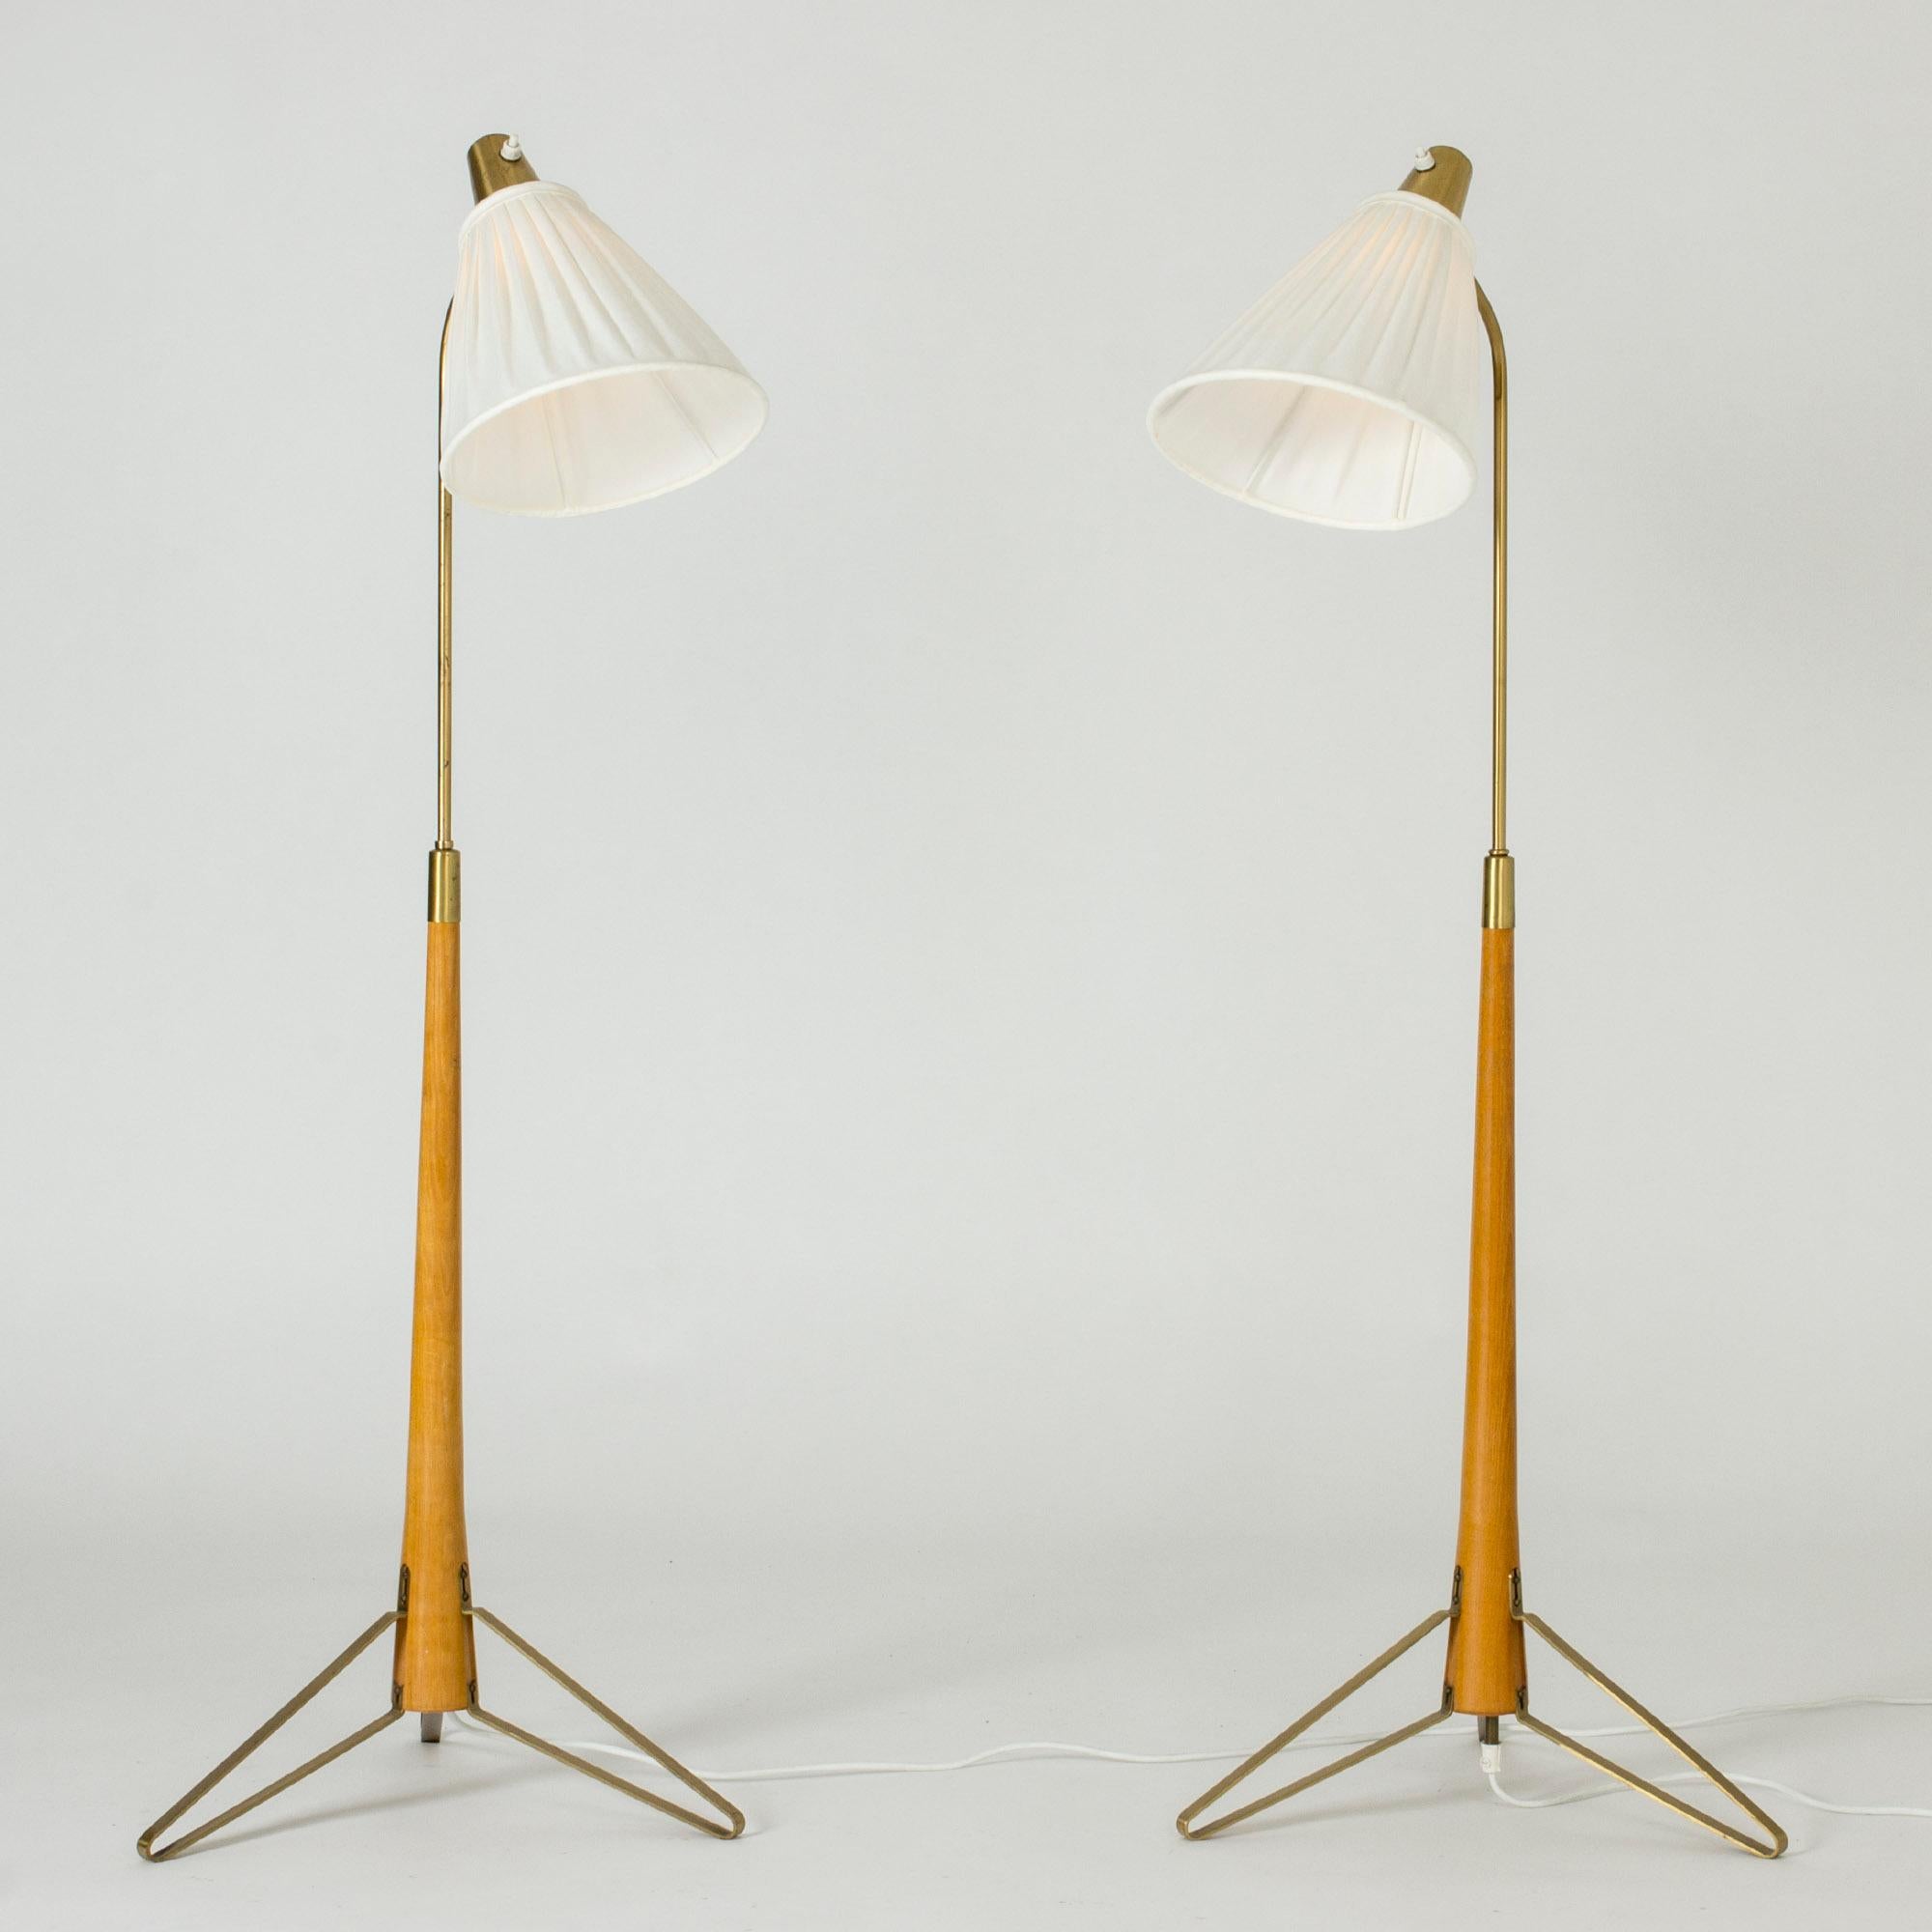 Pair of brass floor lamps by Hans Bergström, with beech handles and elaborately folded brass feet.

The lamps have the same lowest height, 116 cm, but can be adjusted to different heights, 137.5 and 146.5 cm.

Hans Bergström was the owner and